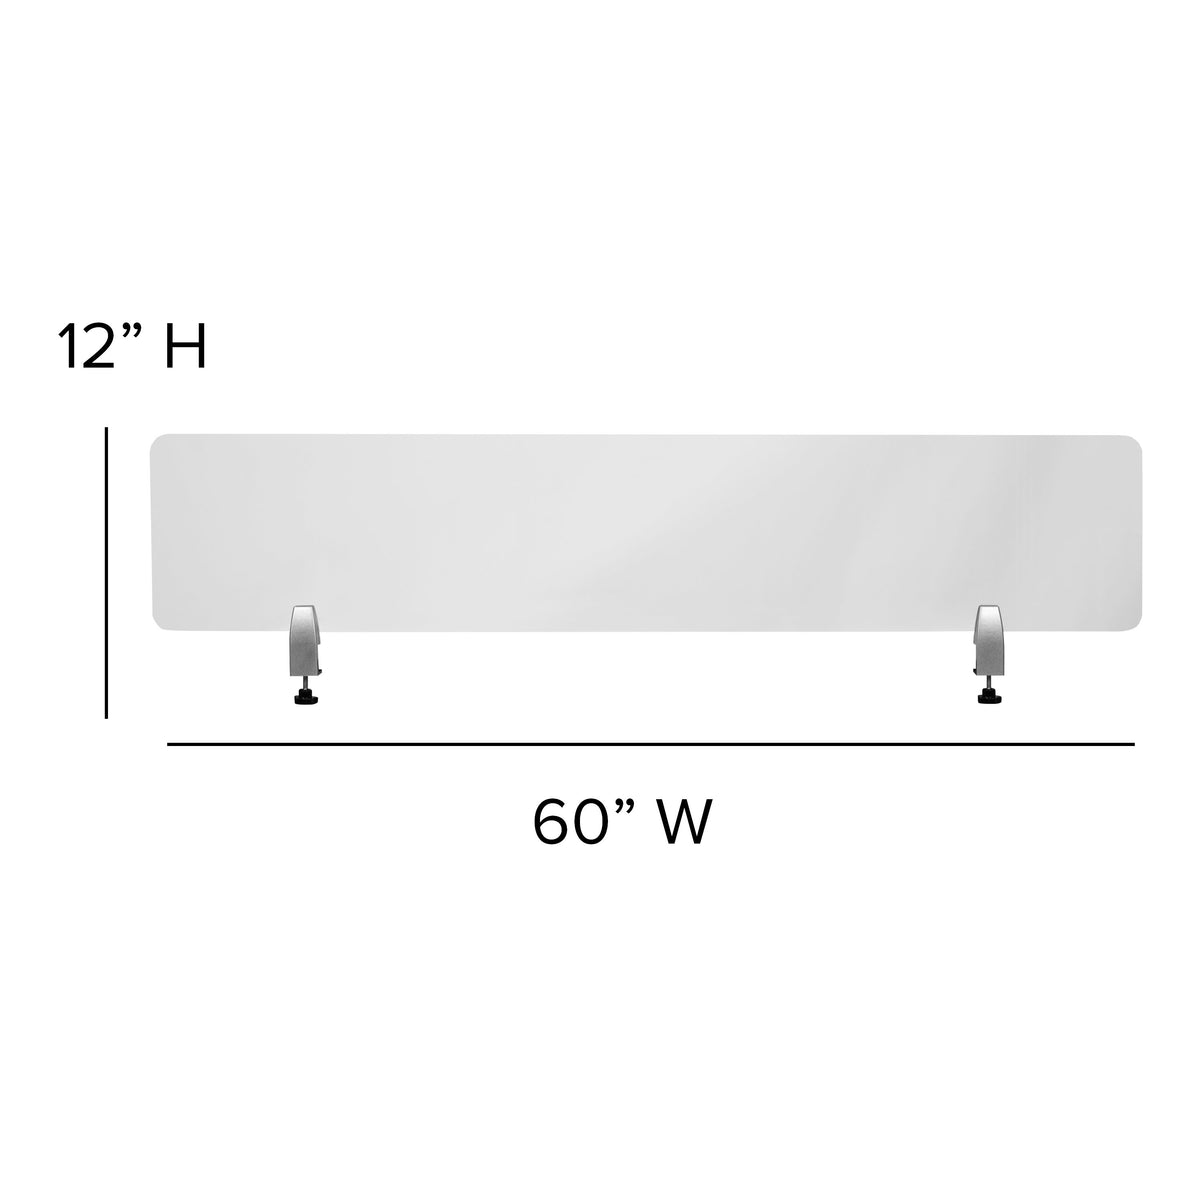 60"L x 12"H |#| Clear Acrylic Desk Partition, 12"H x 60"L (Installation Hardware Included)